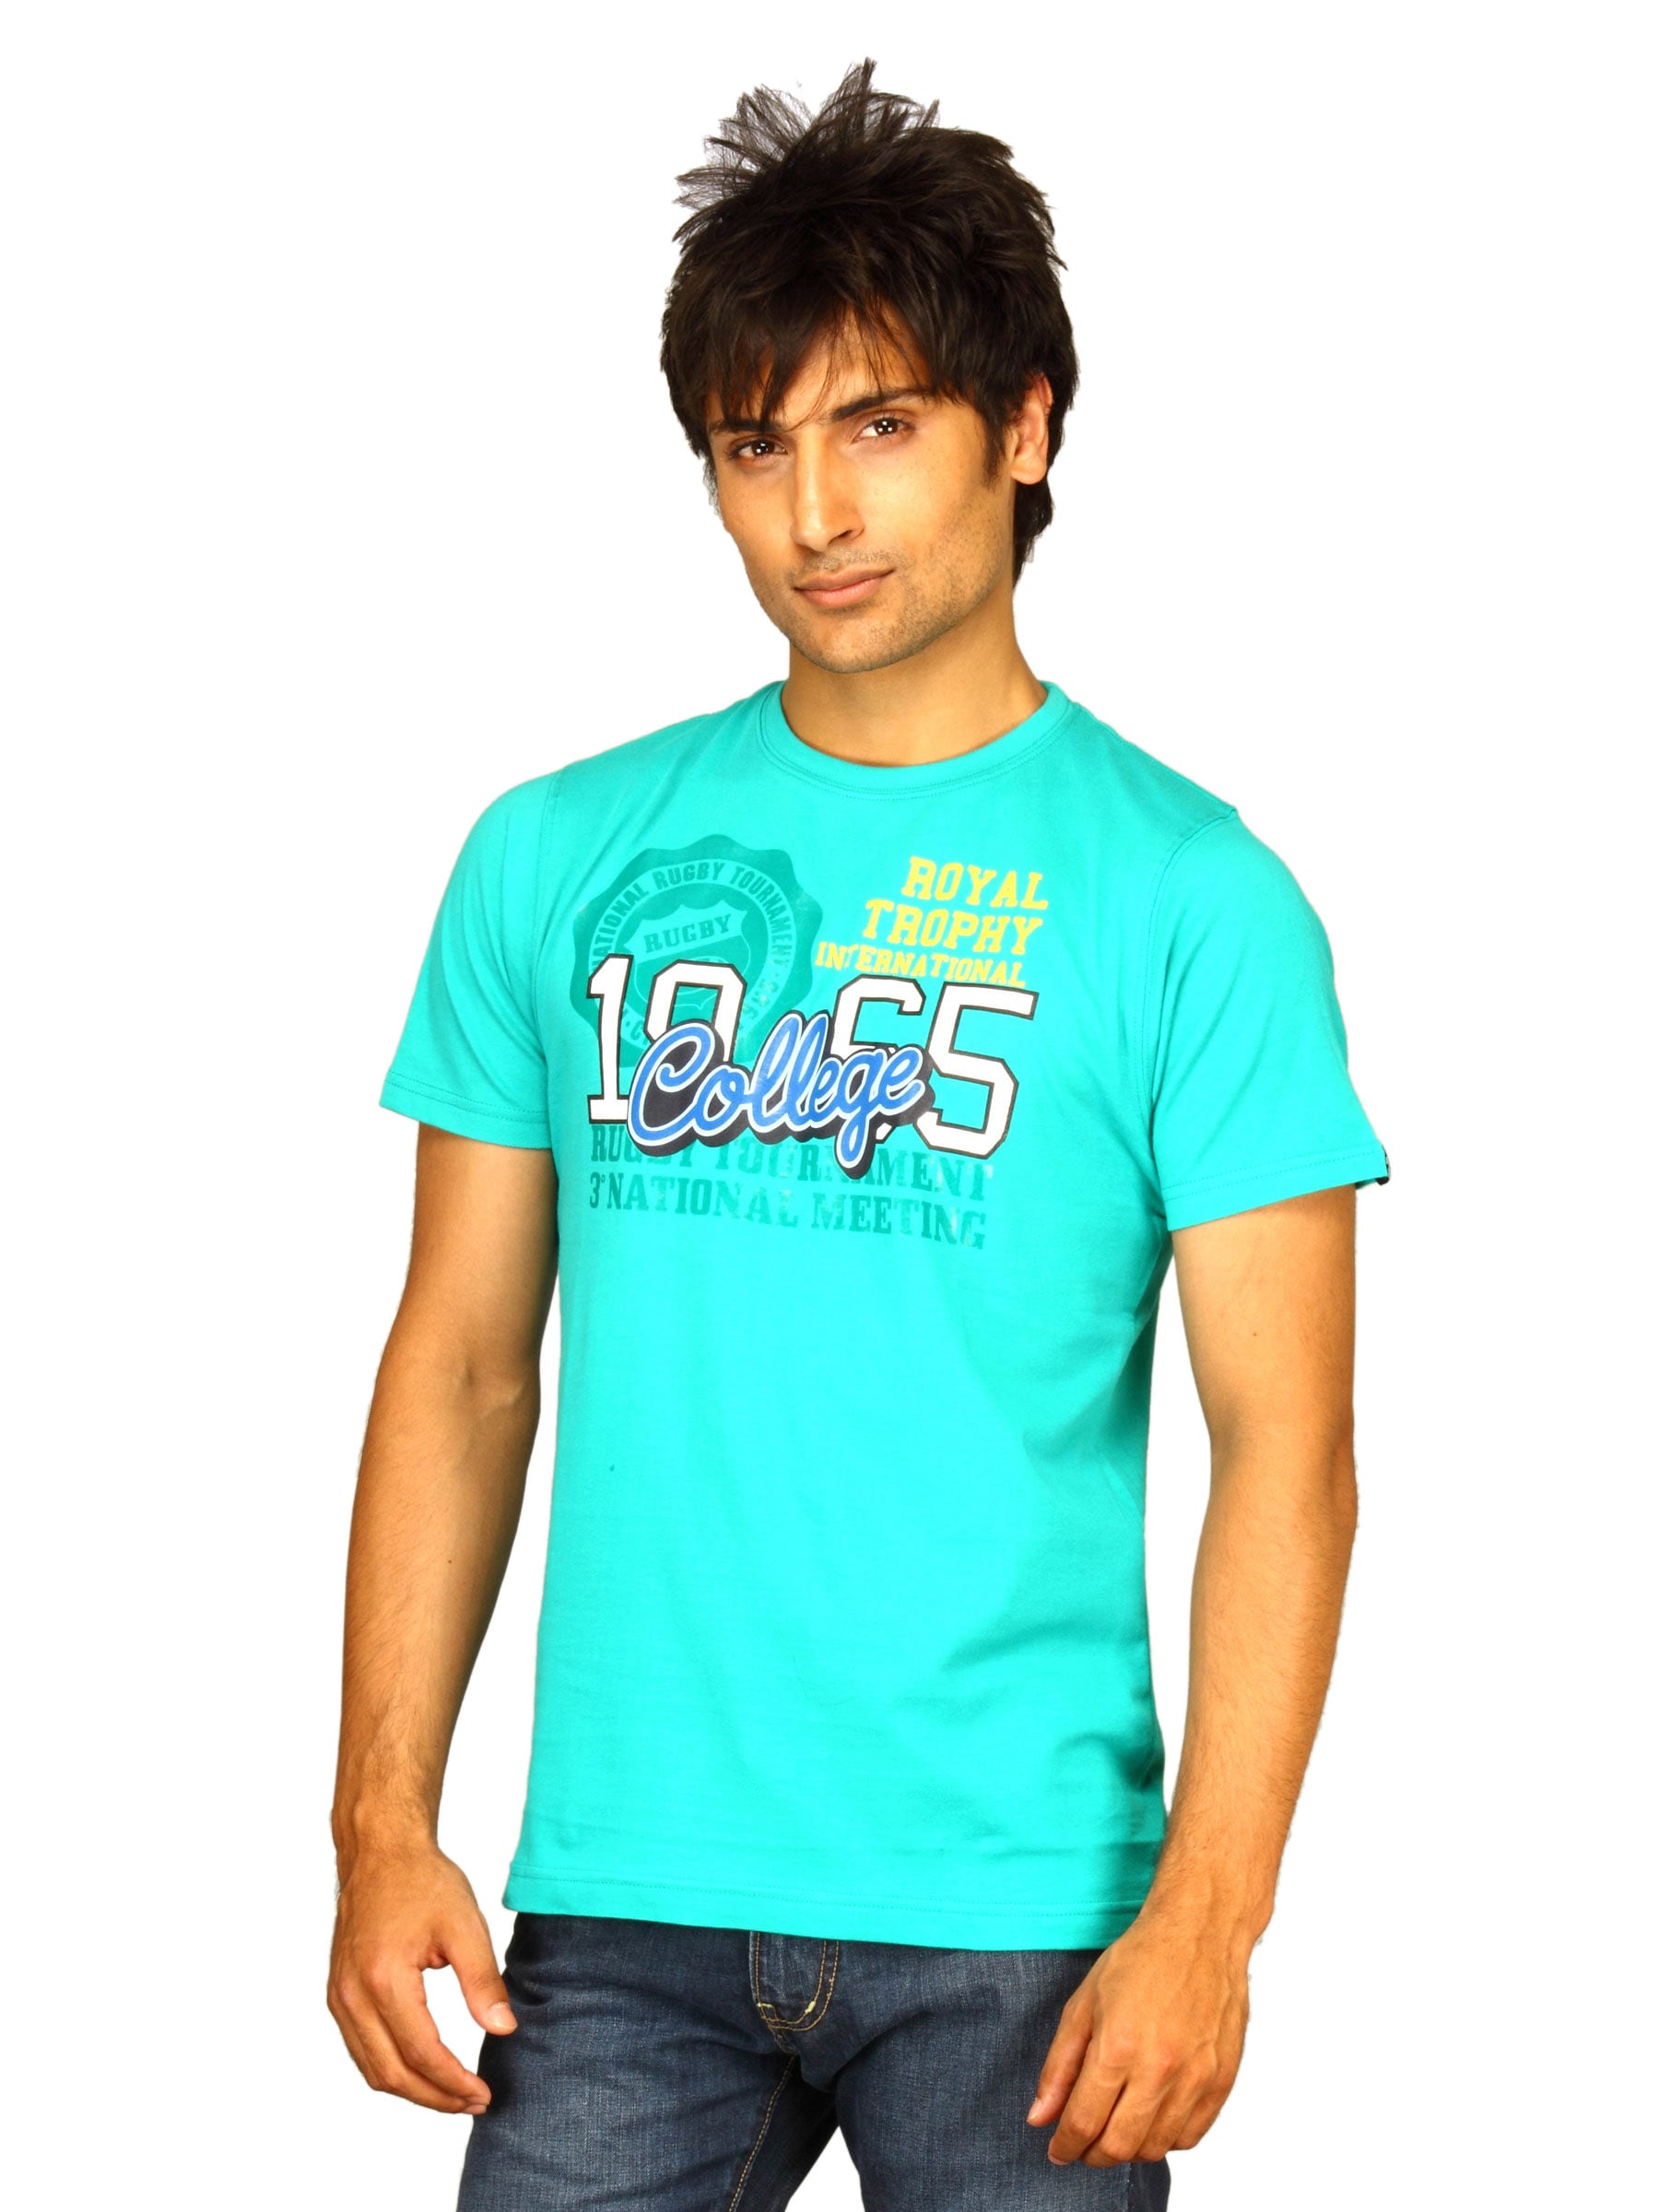 Probase Men's Collage Turquoise T-shirt